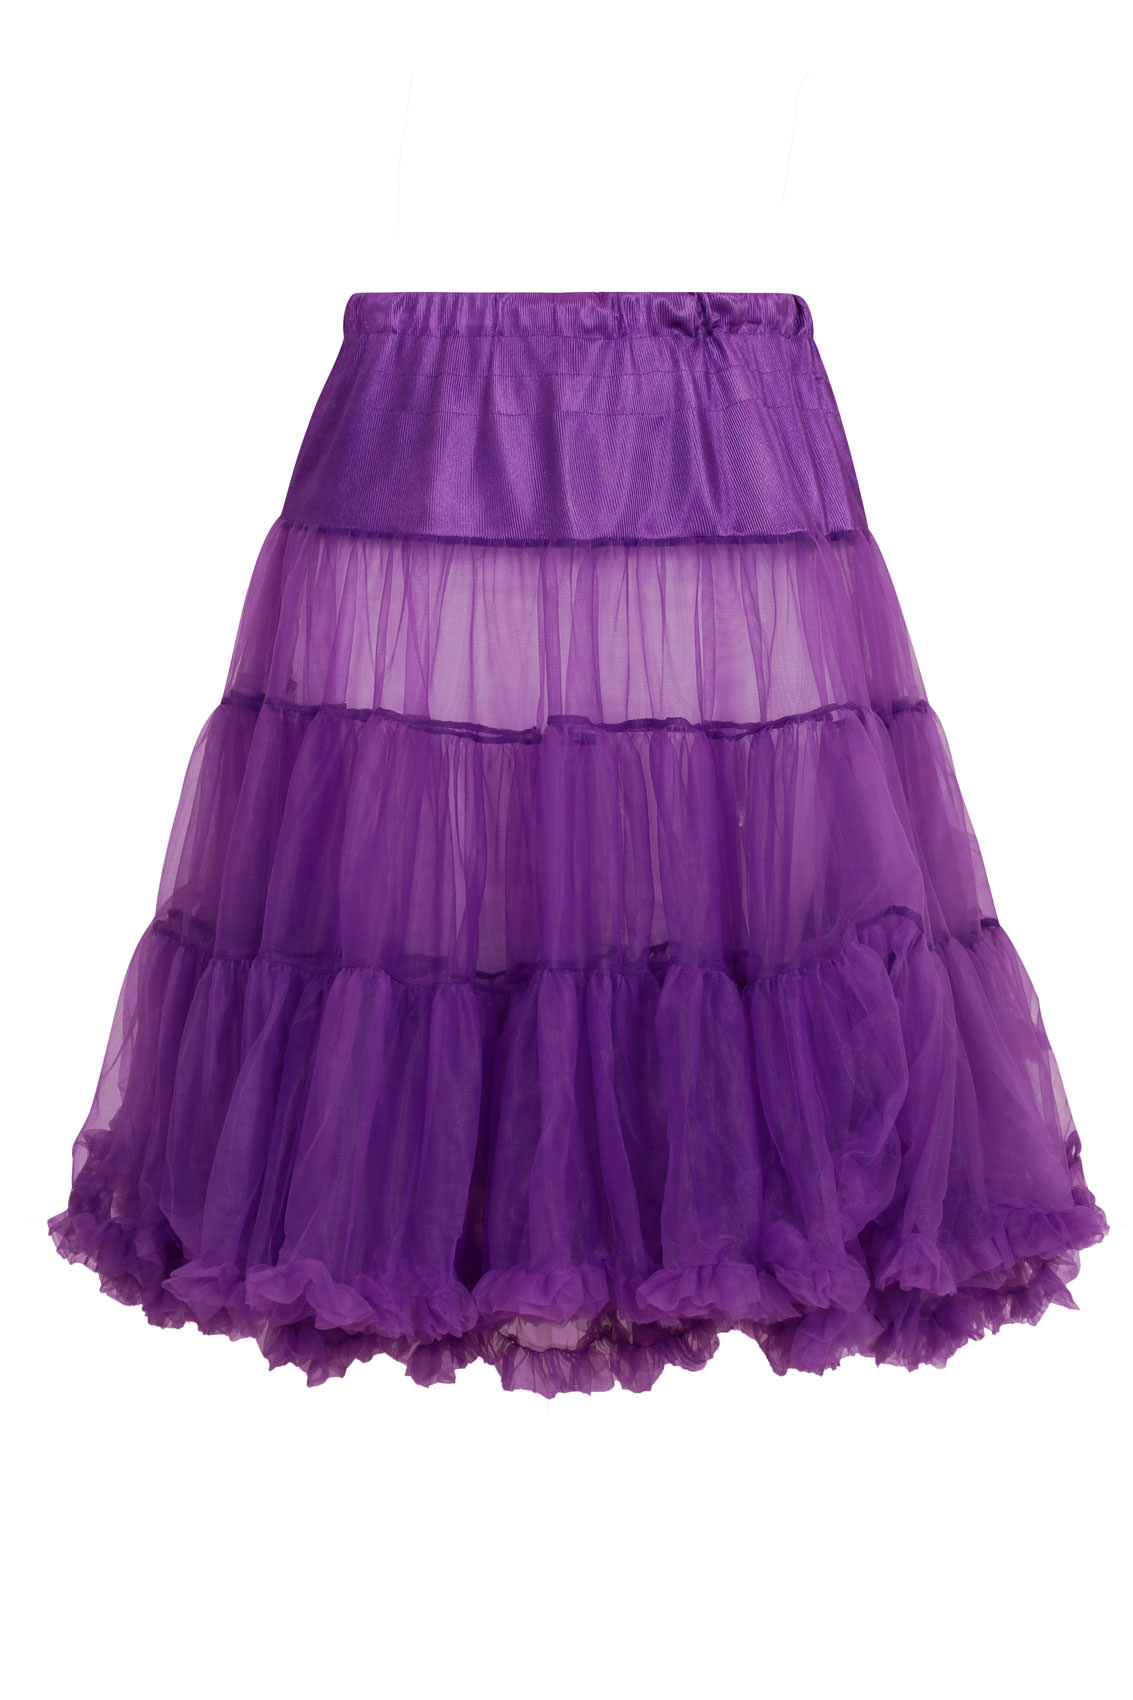 HELL BUNNY Purple Petticoat Flare Skirt, Plus size 16 to 22